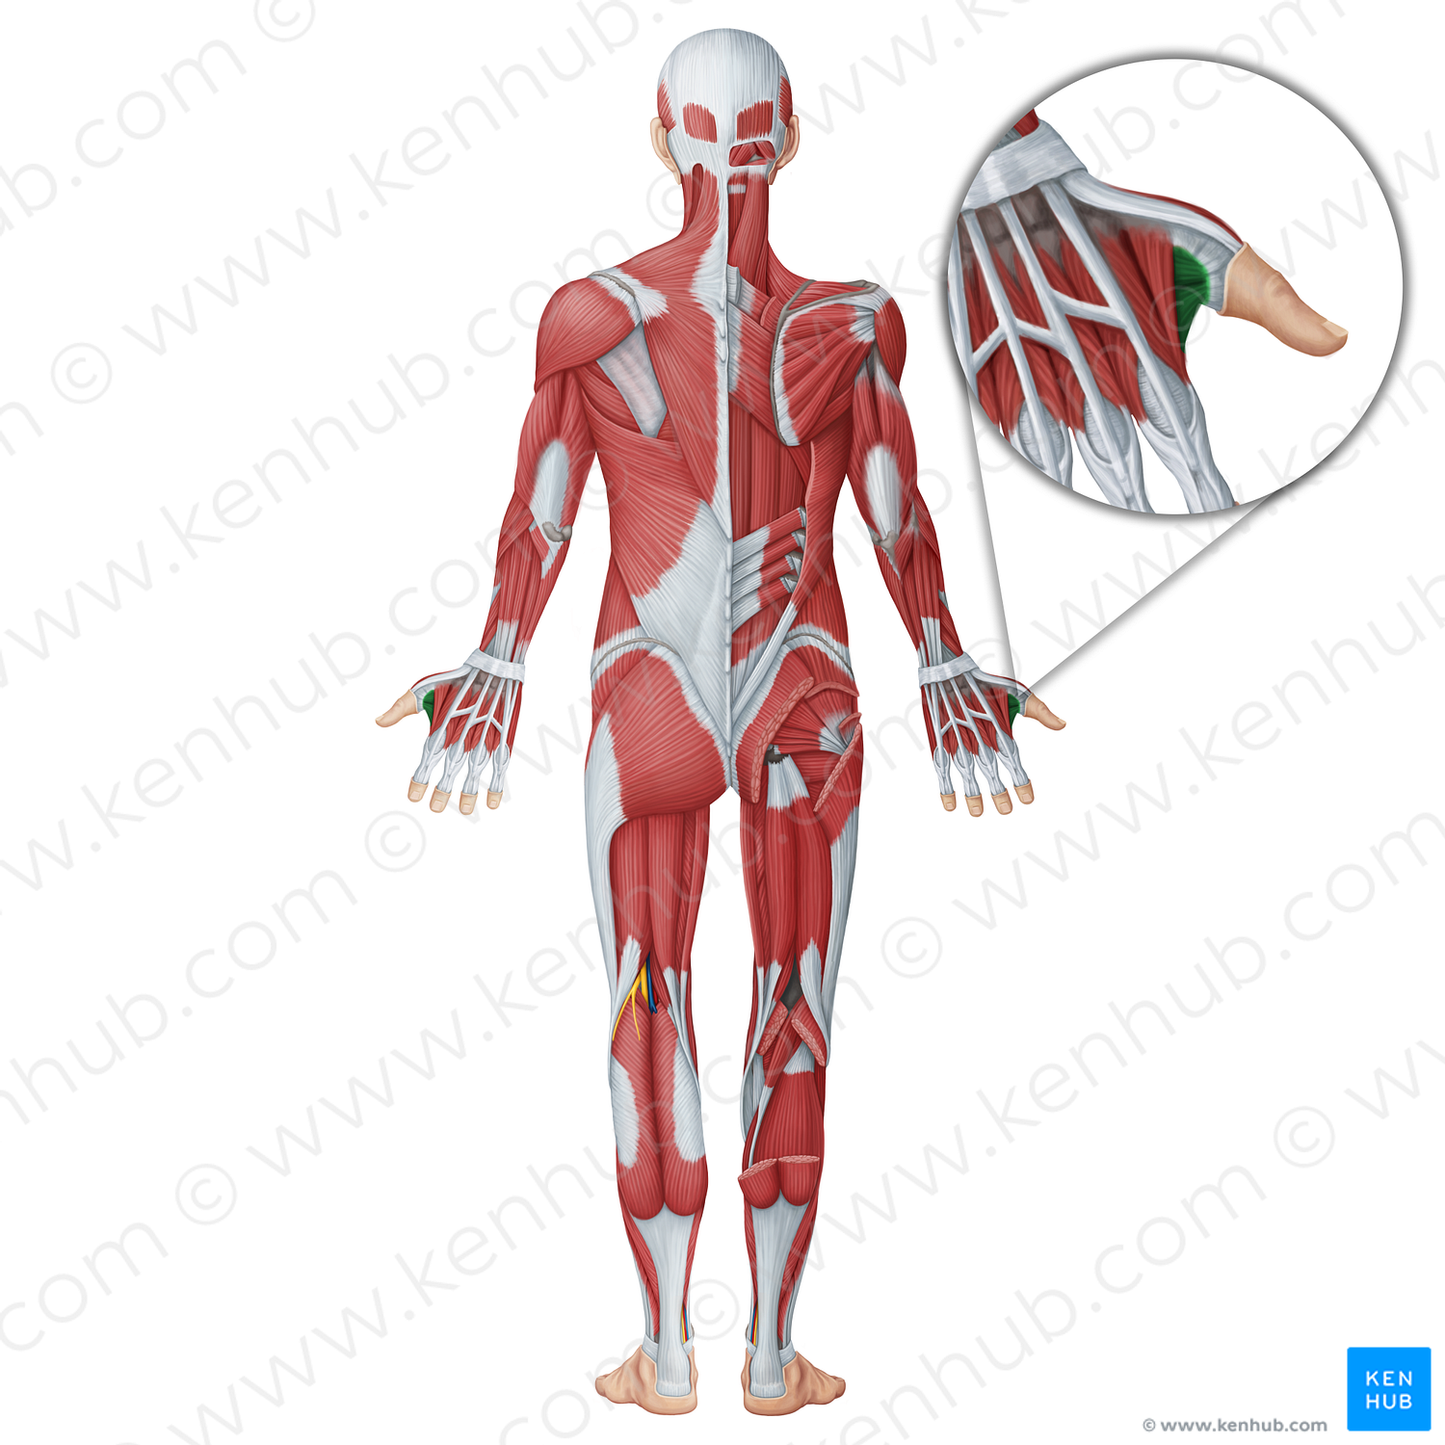 Adductor pollicis muscle (#18642)